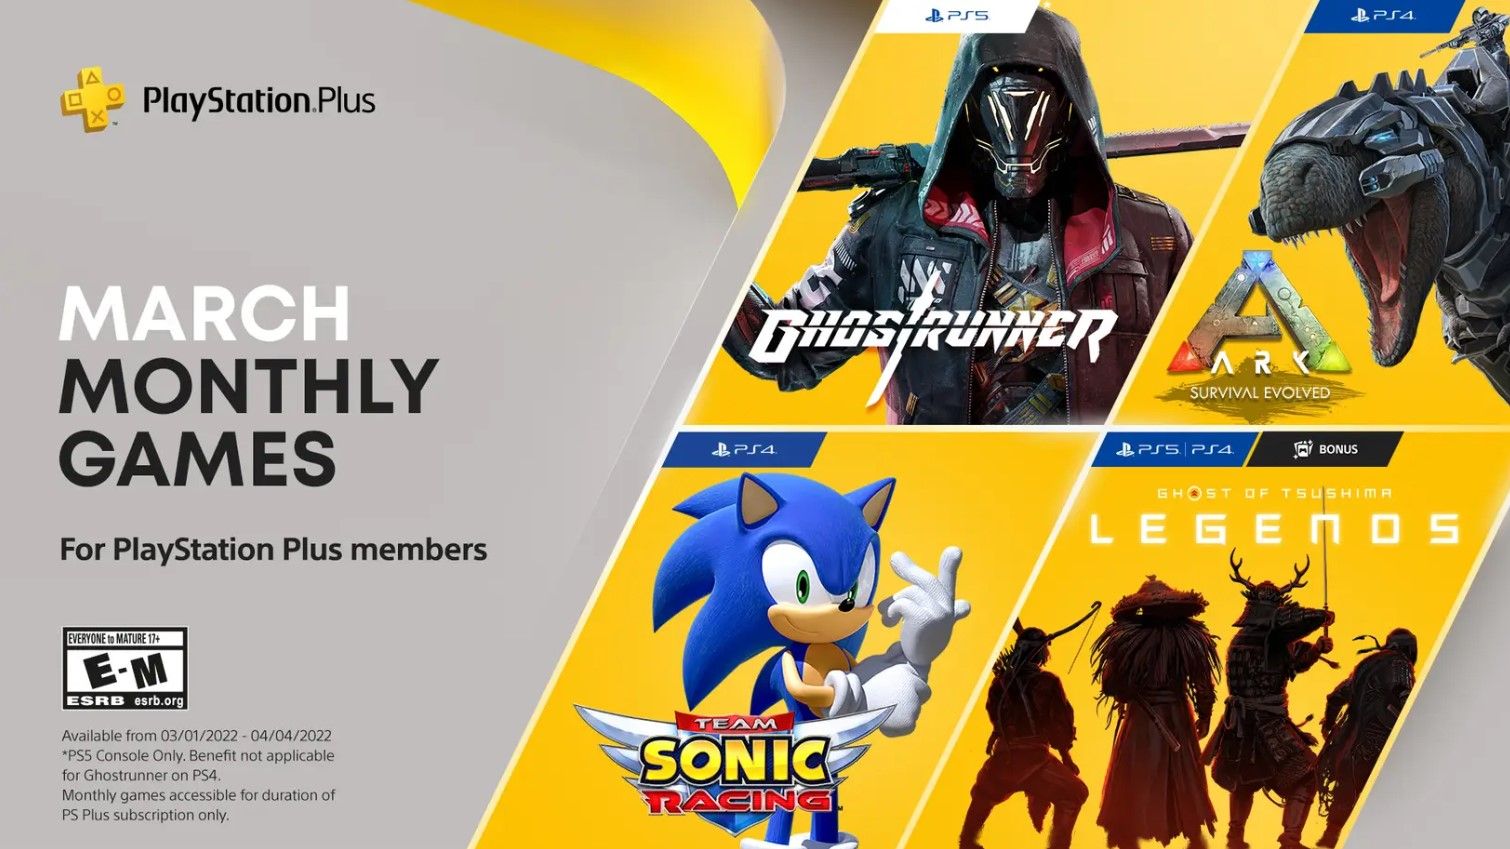 PlayStation Plus subscribers get two free PS5 games Tuesday - CNET